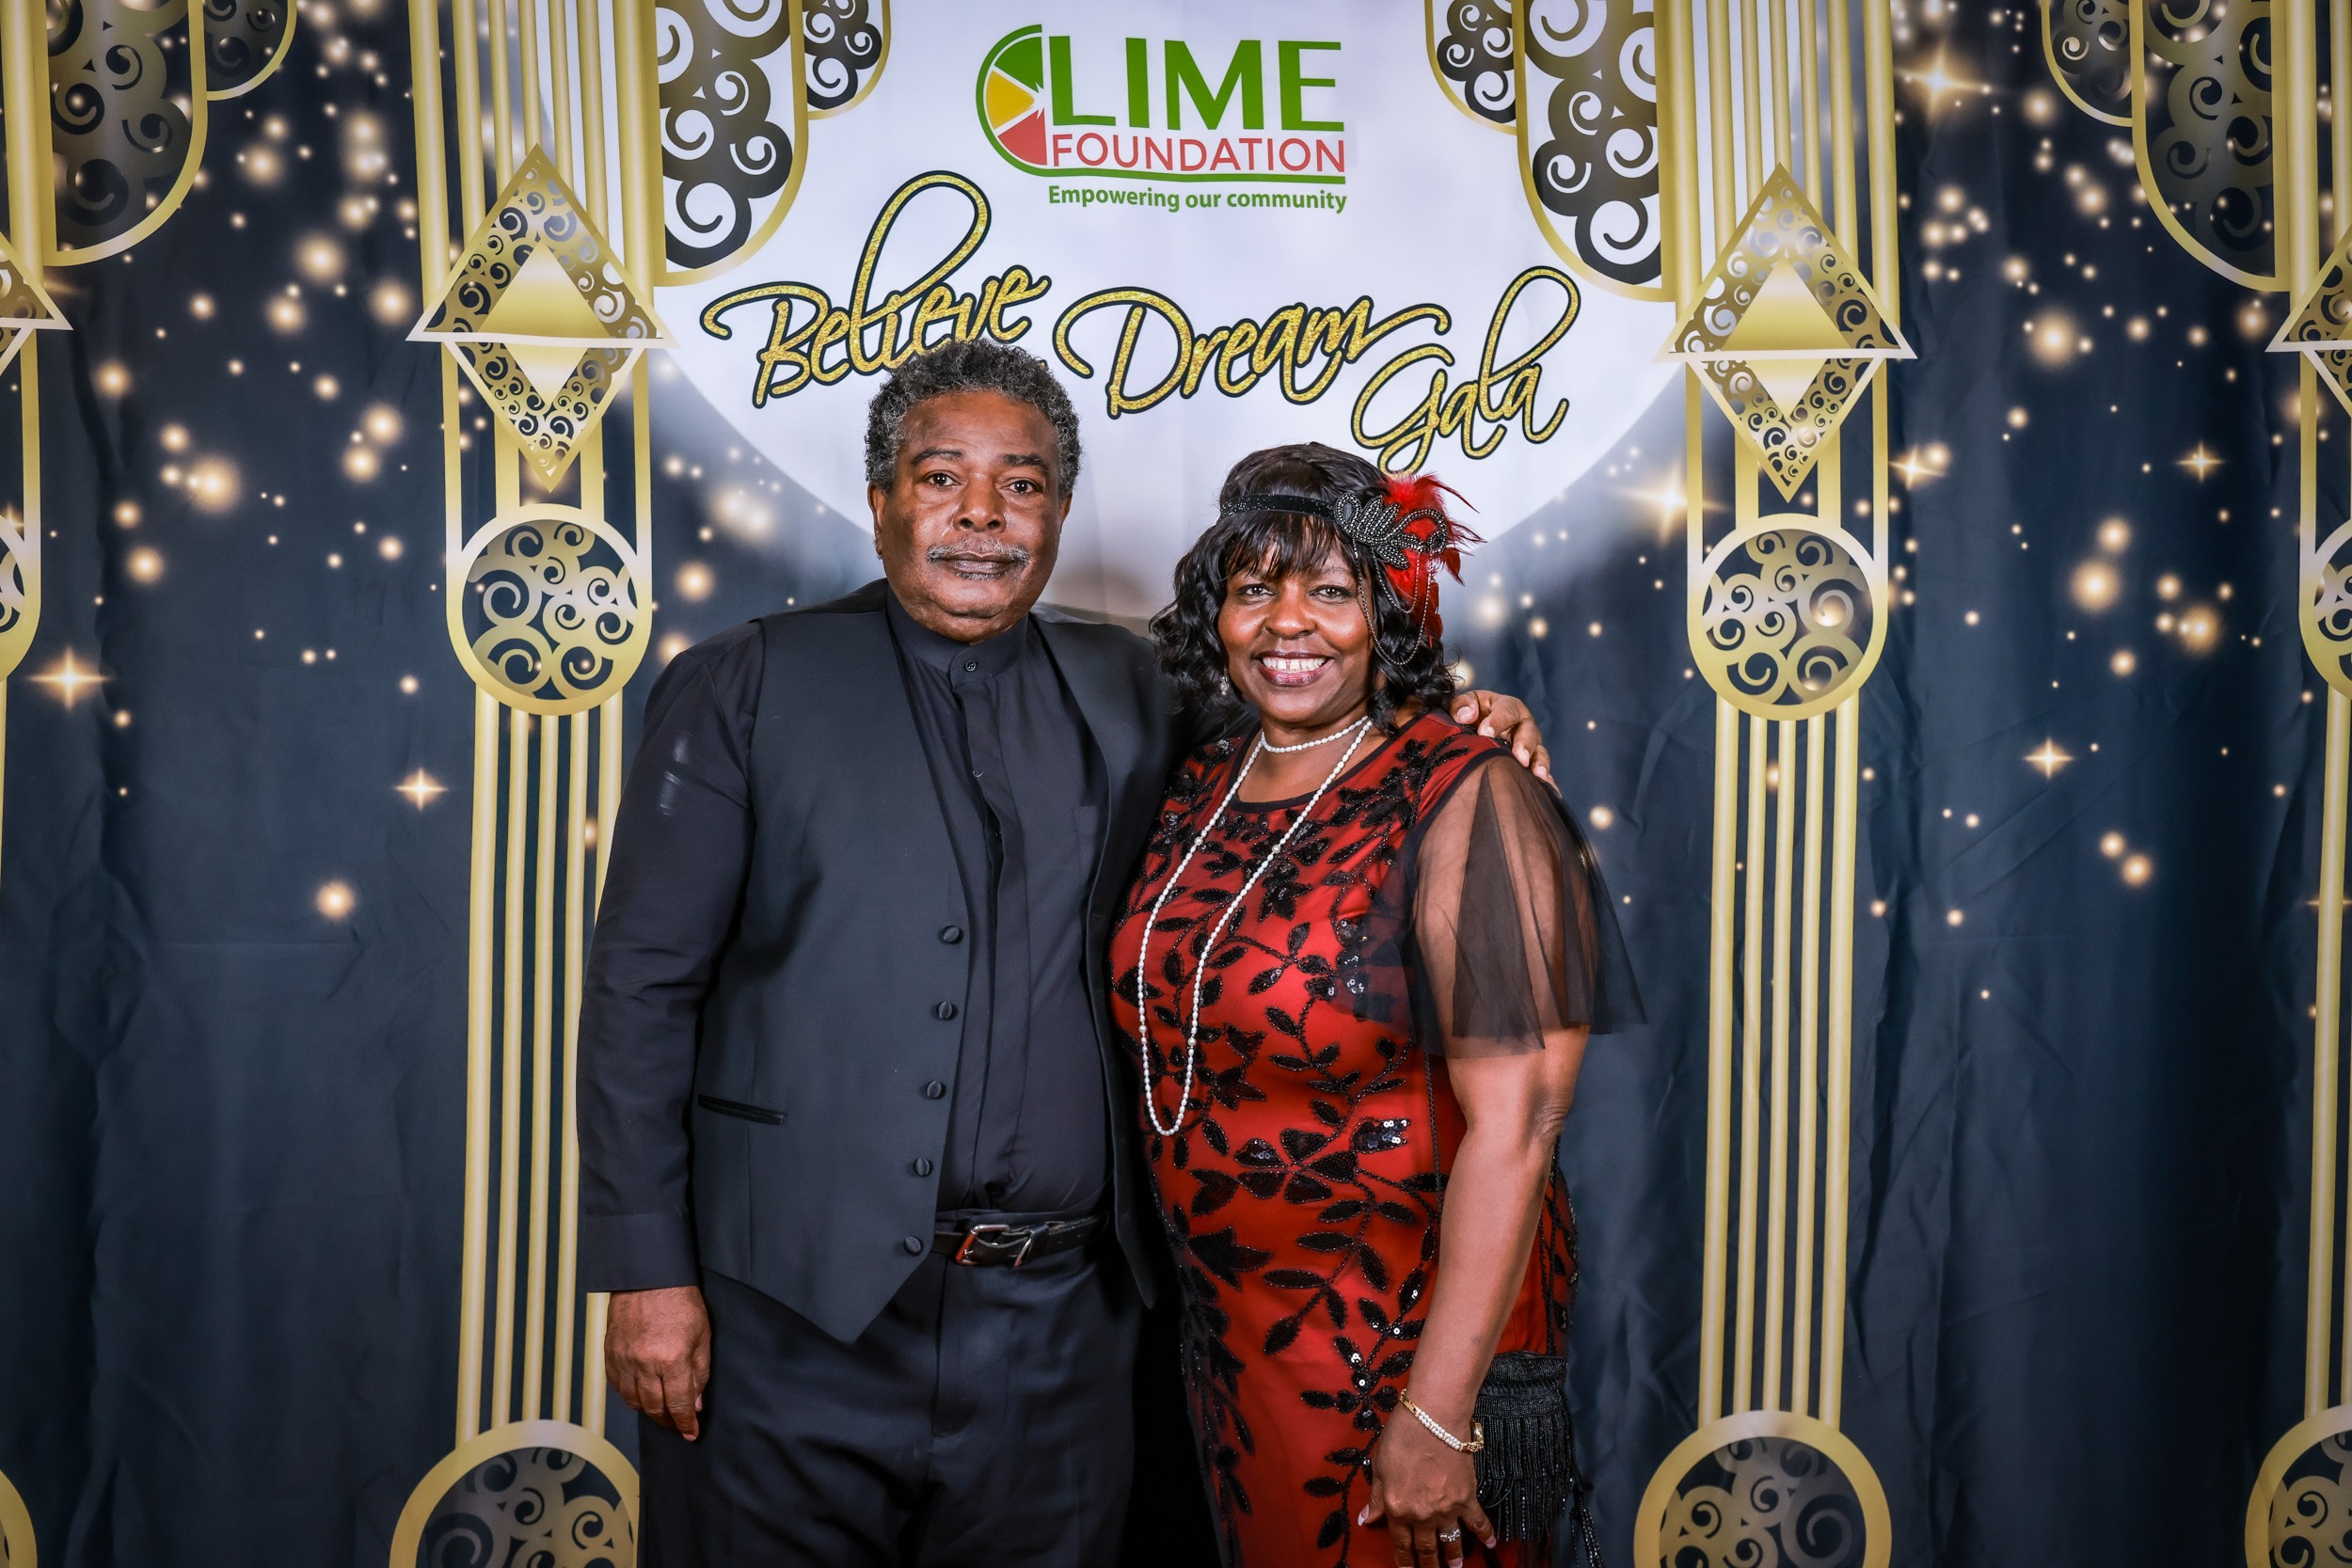 A man and woman posing for a photo on a red carpet at The LIME Foundation of Santa Rosa, a non-profit organization.